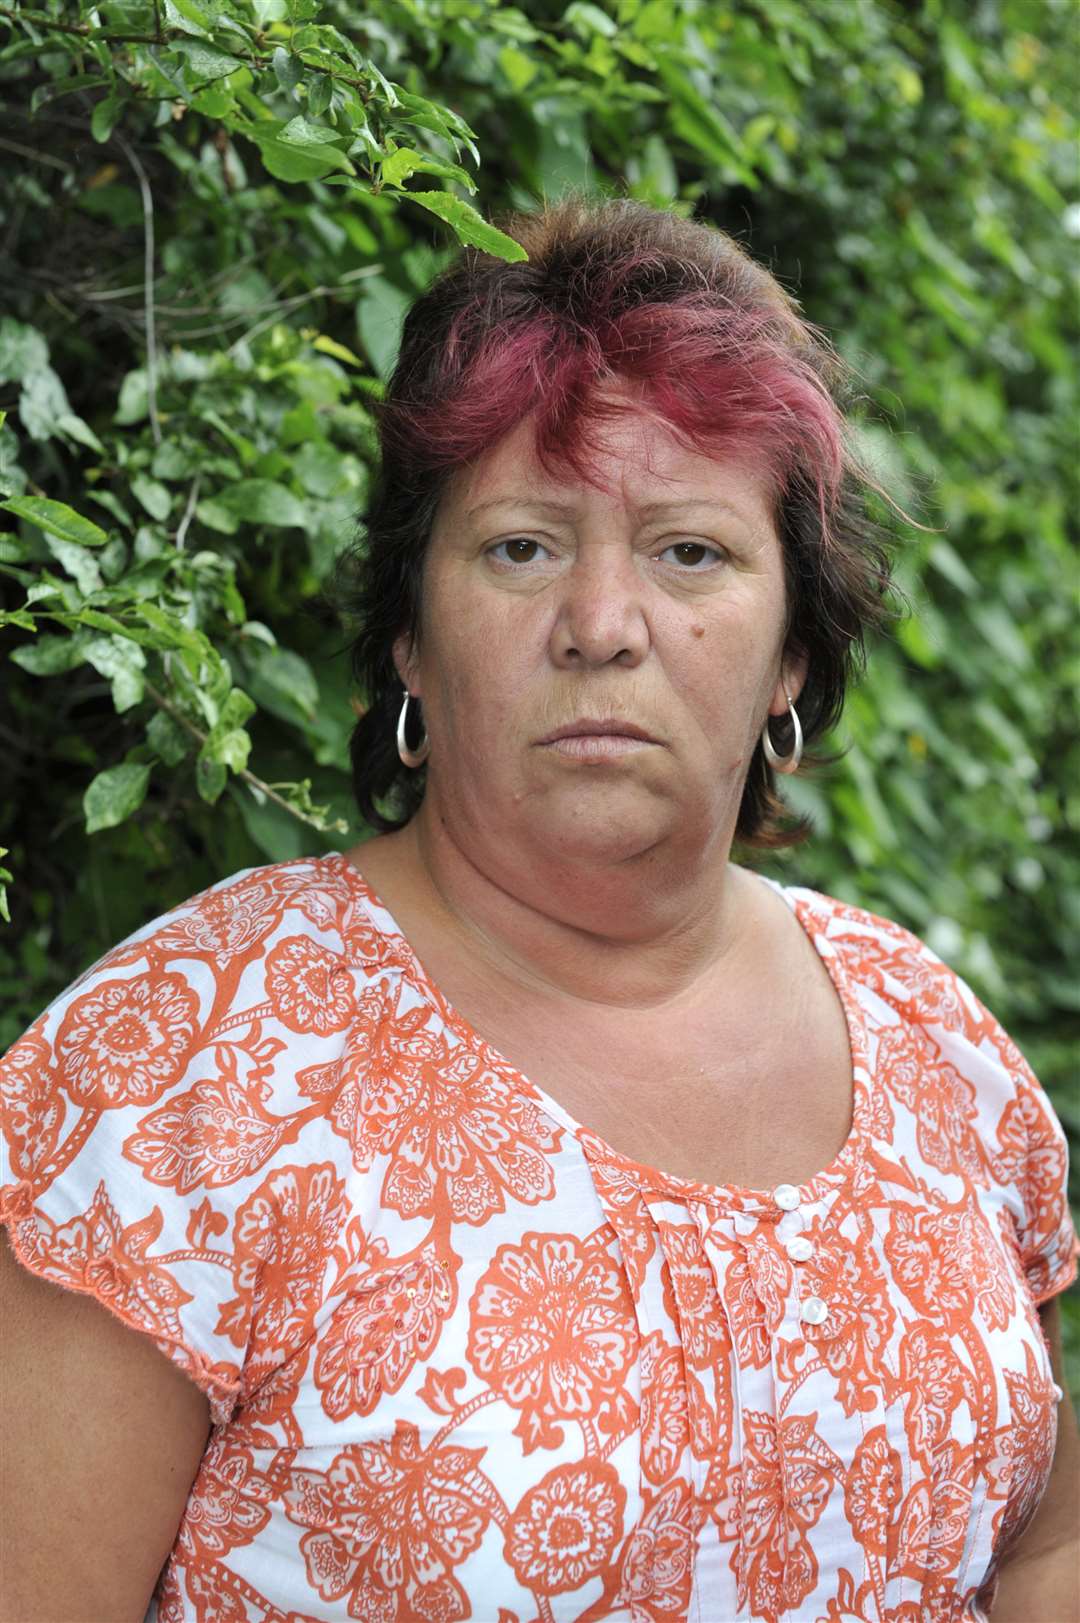 Dawn James has complained to the council about the overgrown alleyway